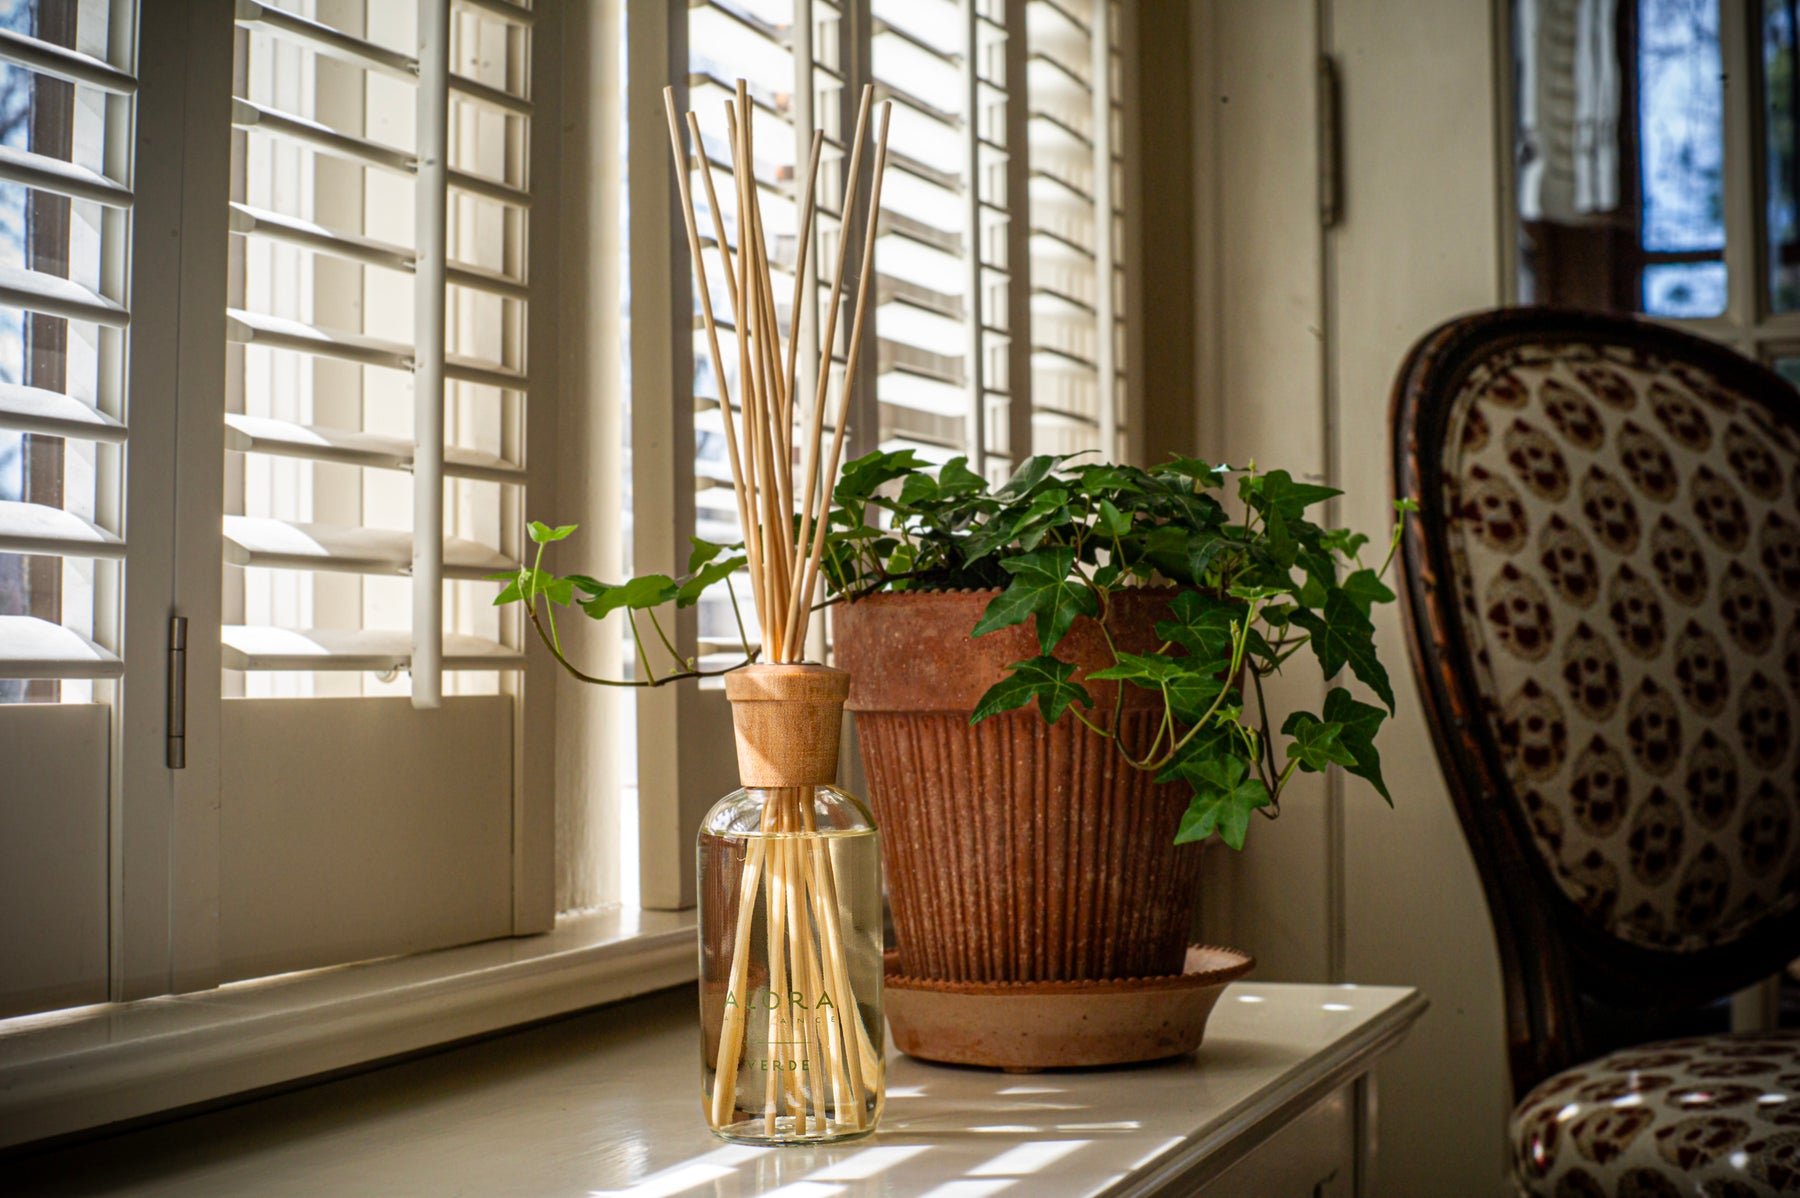 Reed diffuser on window sill next to terracotta pot filled with ivy.